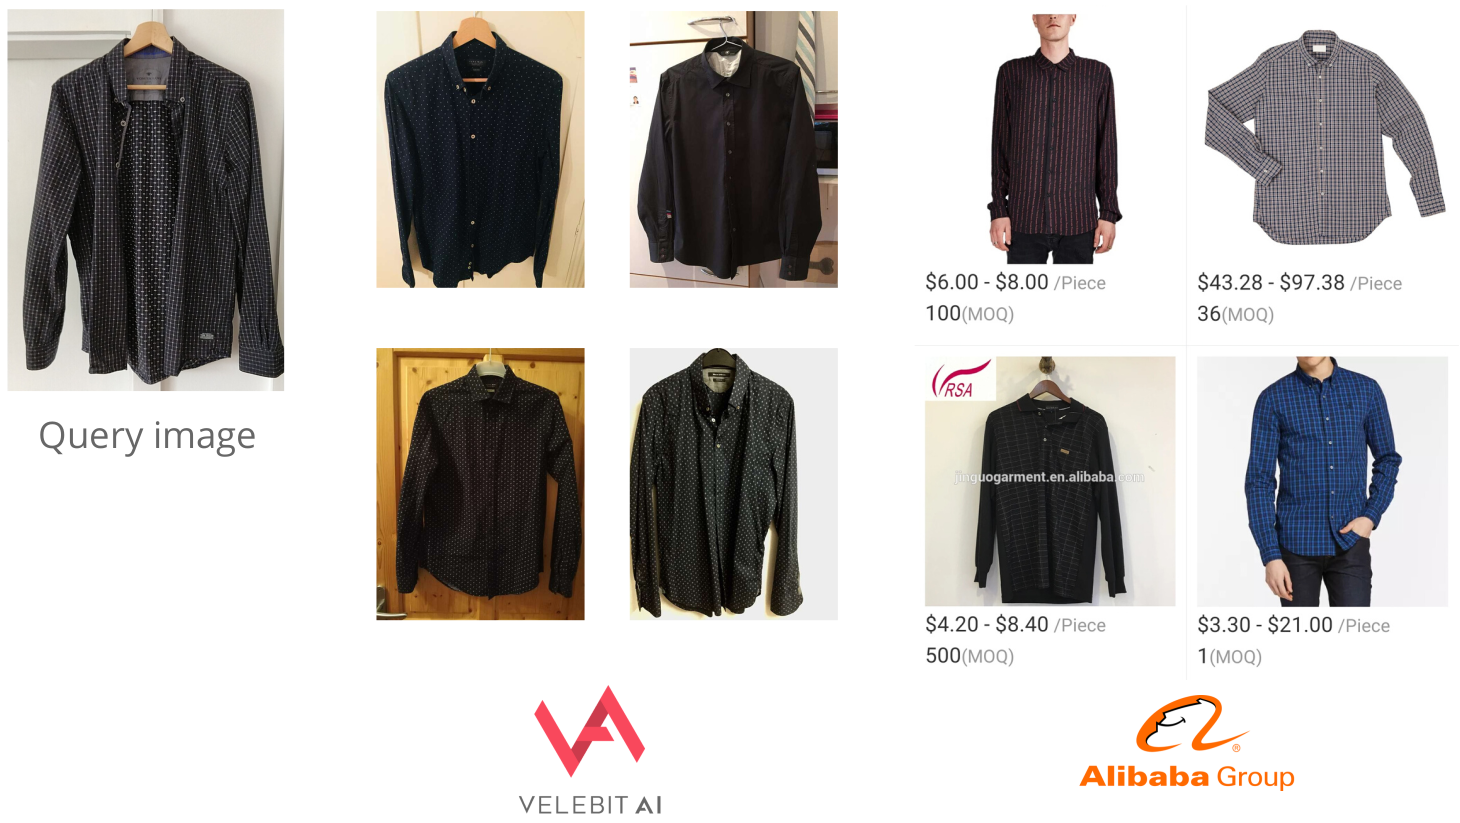 Difference in top results between our specialized model and the general model Alibaba offers.